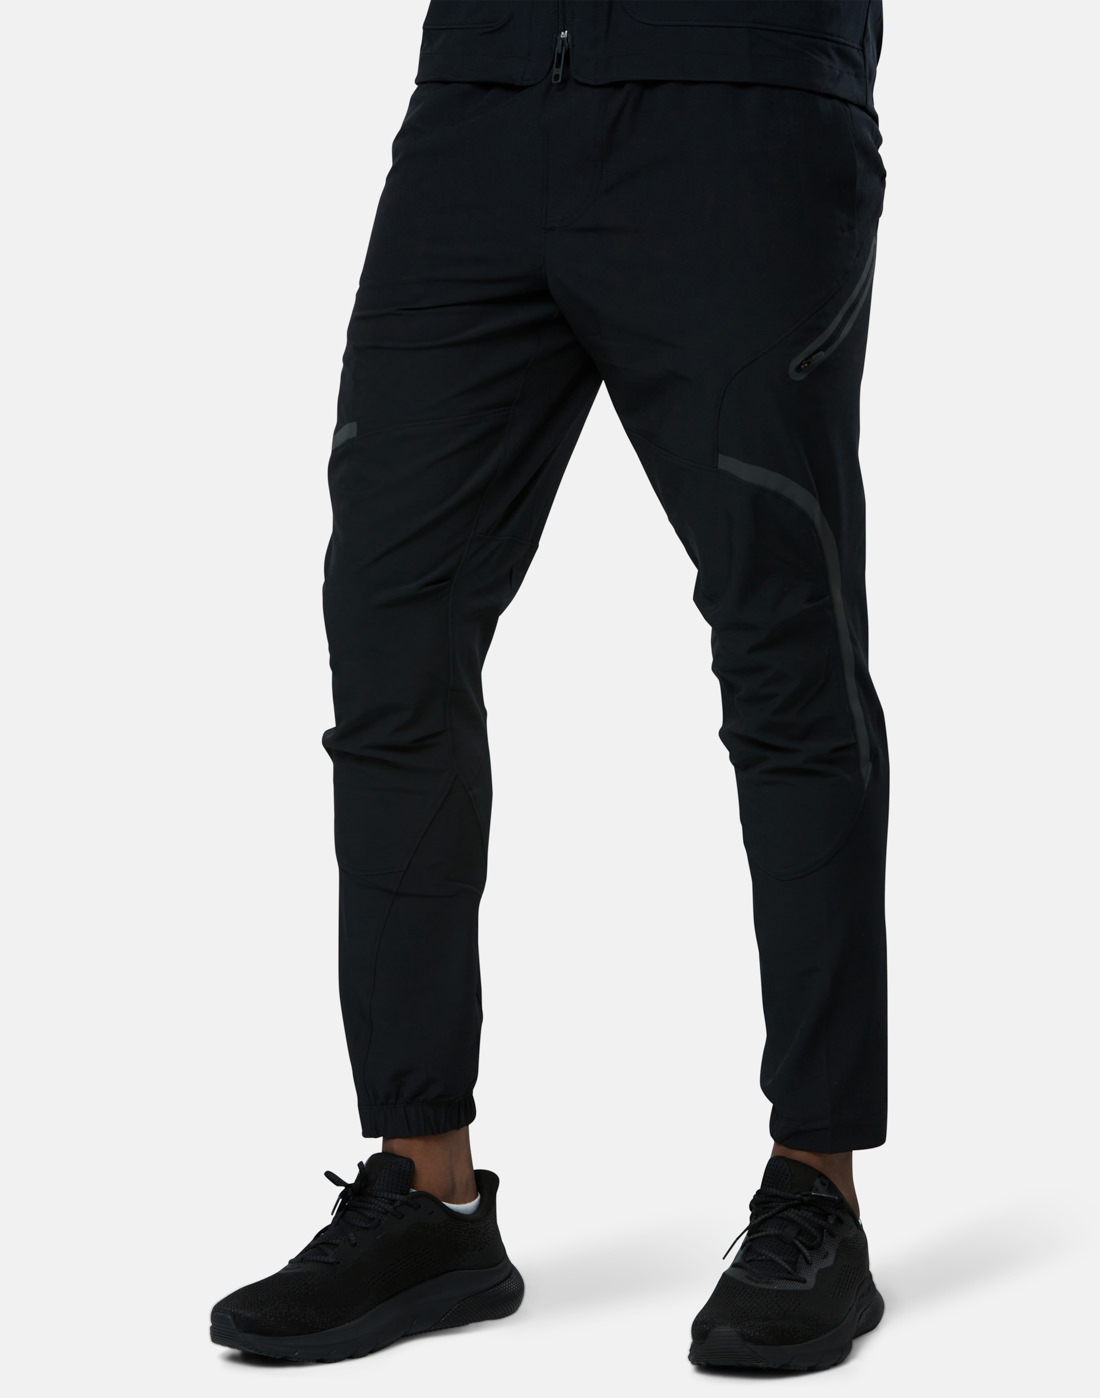 Under Armour Mens Unstoppable Cargo Pants - Black | Life Style Sports UK